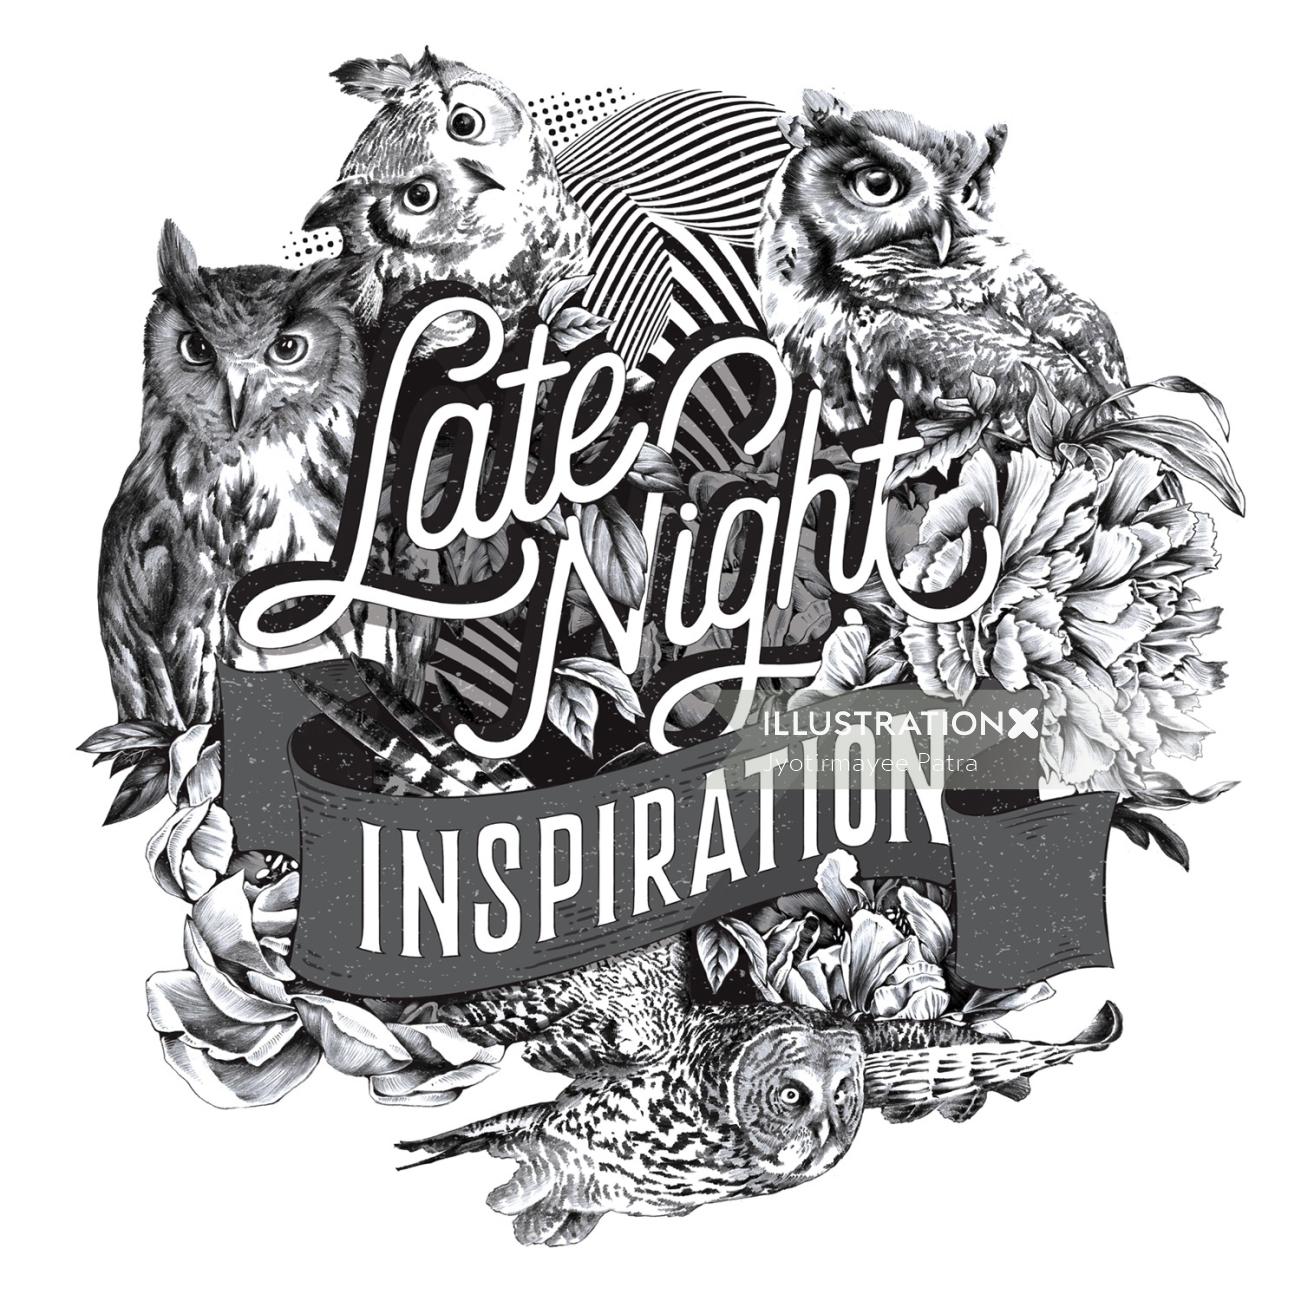 Late Night Inspiration hand-lettered art piece.